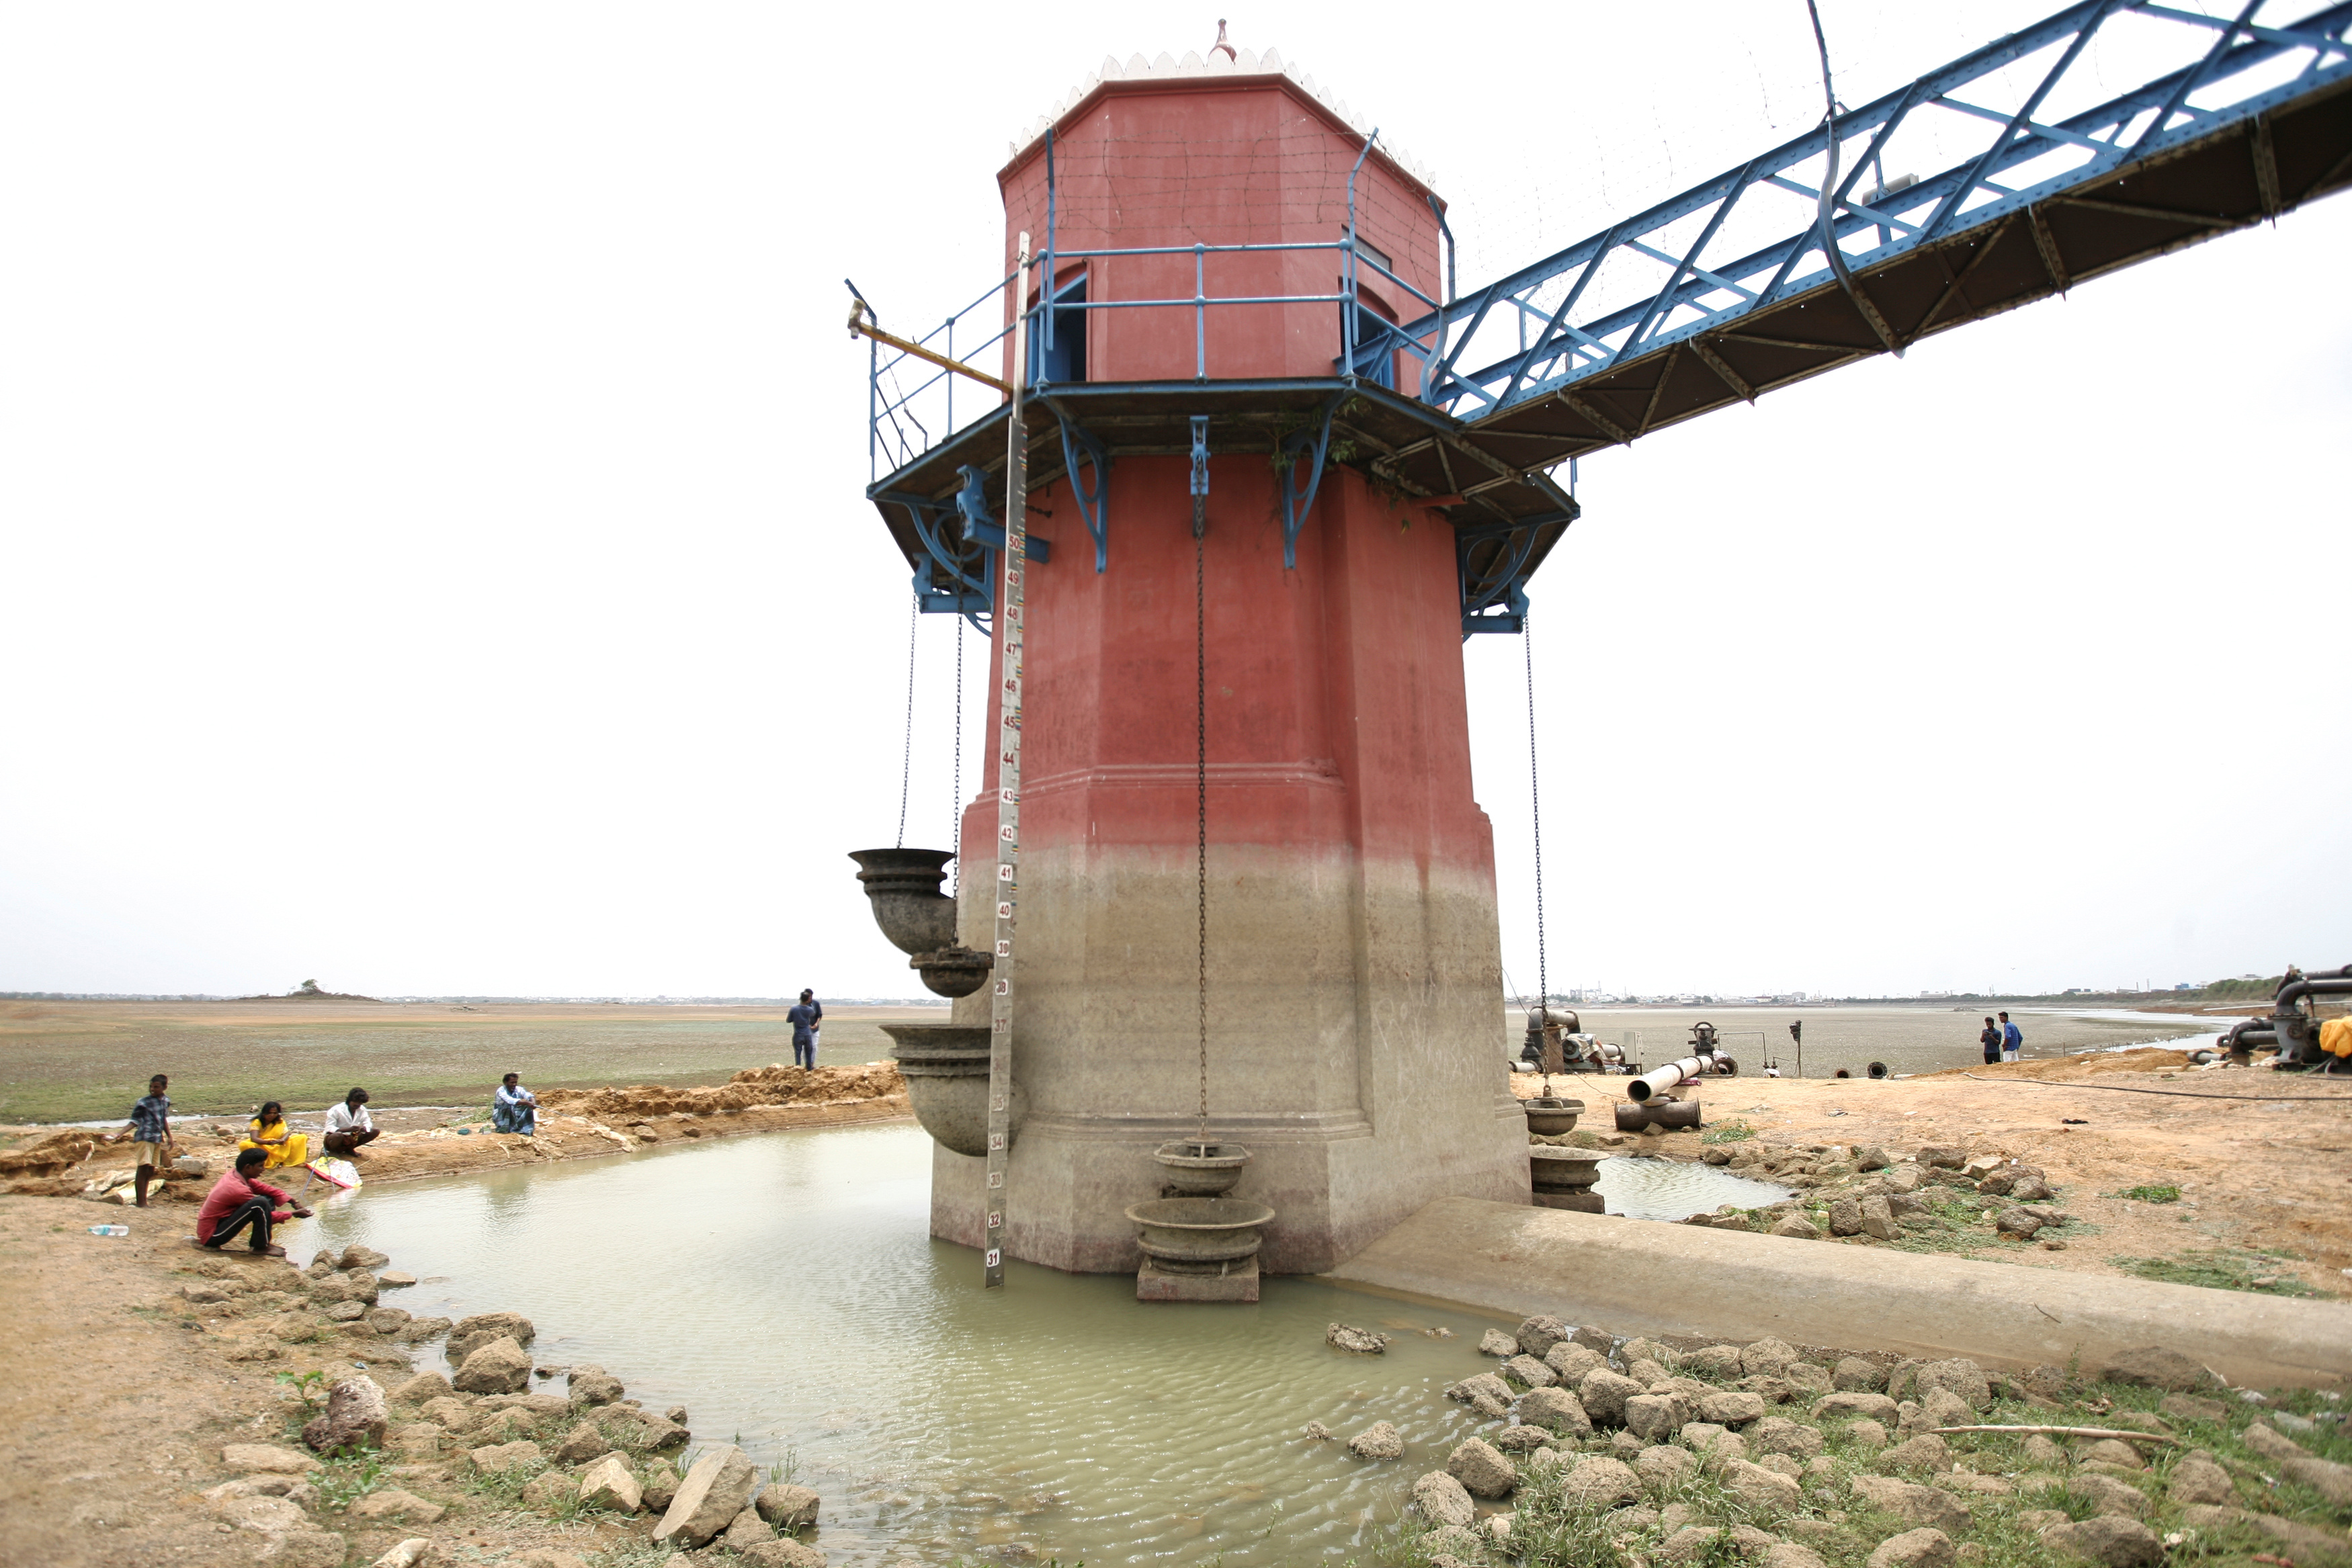 People sit around a tower for measuring water depth in the dried-up Puzhal reservoir, on the outskirts in Chennai